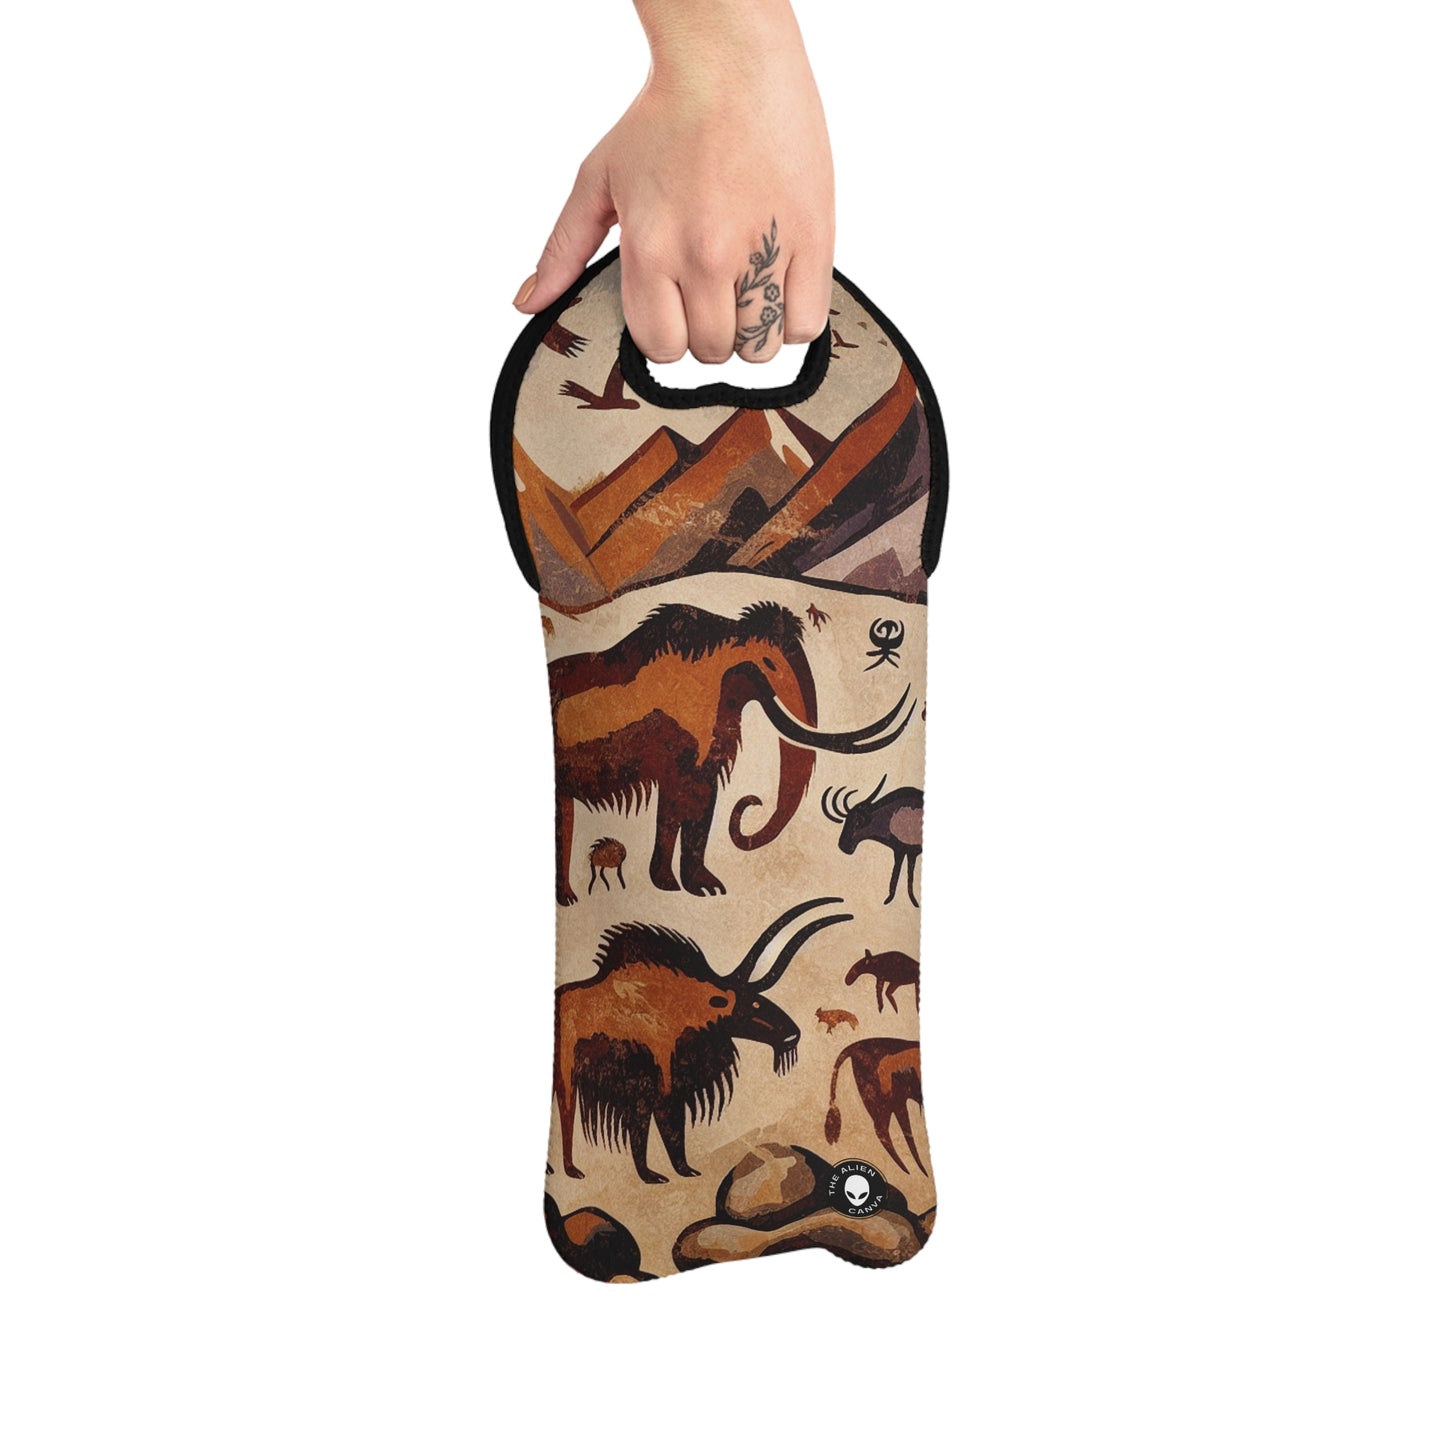 Title: "Ancient Encounter: The Battle of Giants" - The Alien Wine Tote Bag Cave Painting